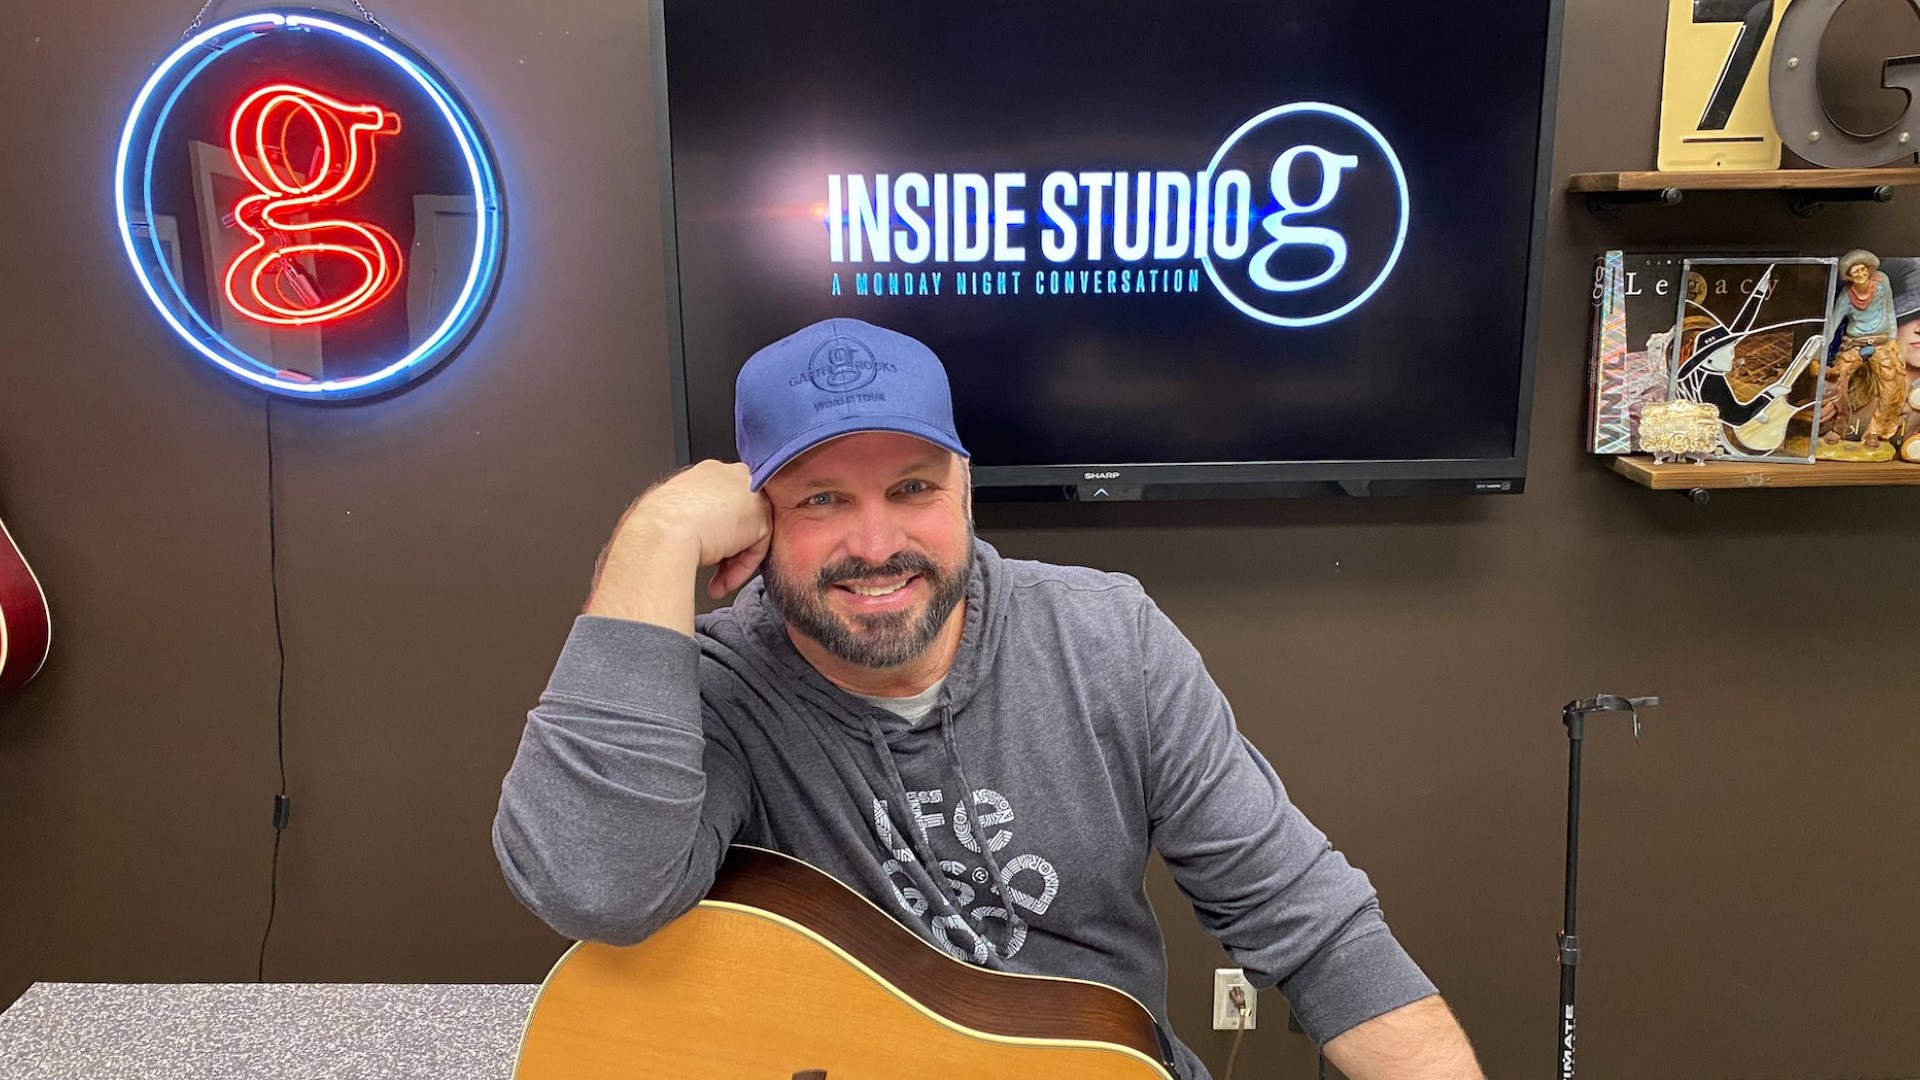 Garth Brooks tickets sold so fast a second Charlotte concert was added to his 2022 stadium tour.